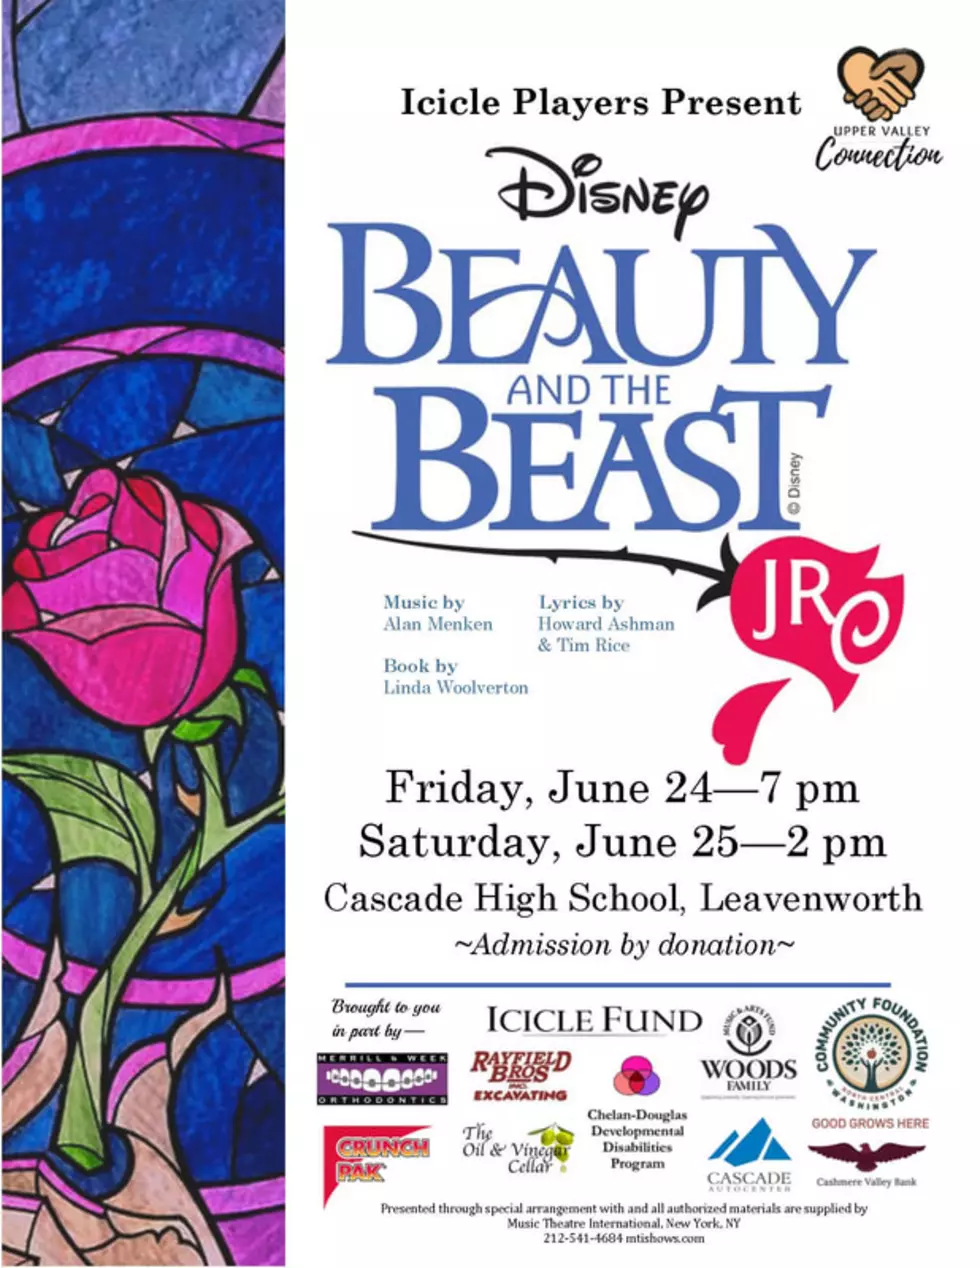 Upper Valley Connection Introduces Beauty and the Beast Jr.